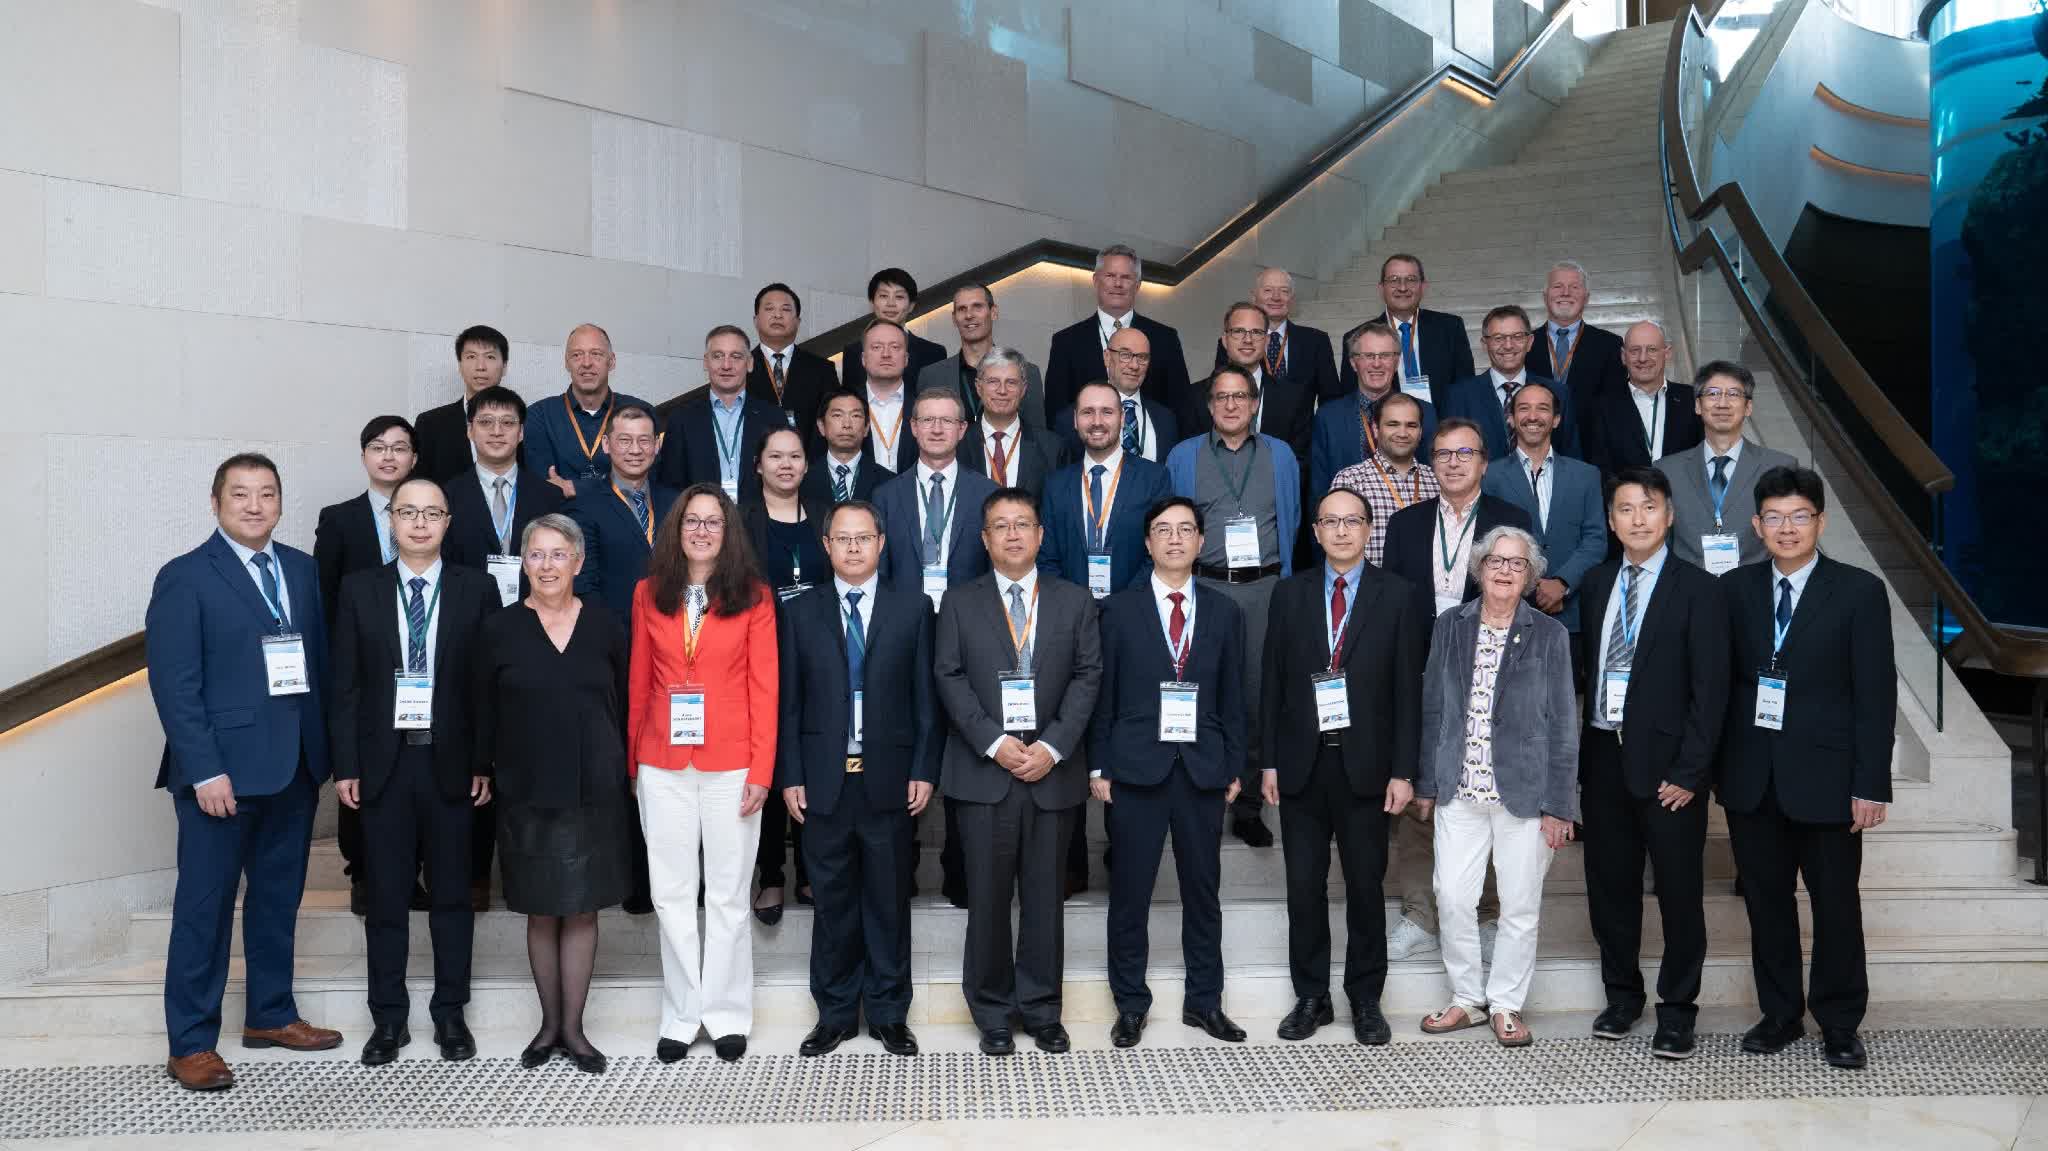 71st International Meeting of Technical Authorities for Cableways concludes successfully